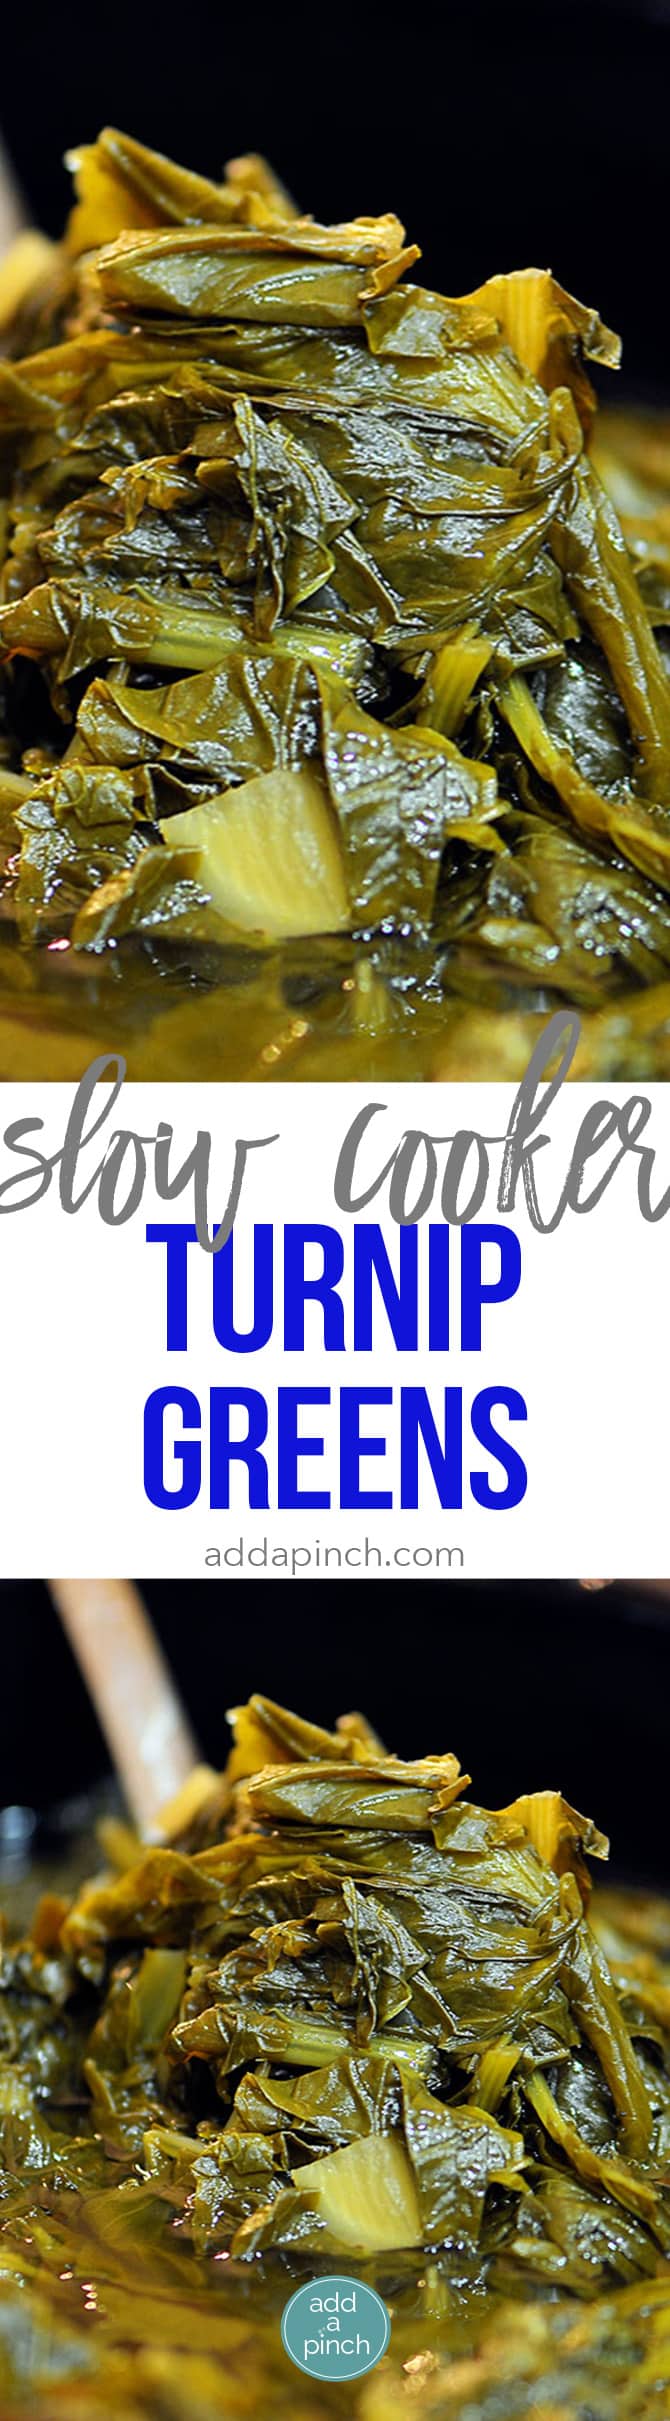 Slow Cooker Turnip Greens makes easy work of a favorite Southern dish. Perfect for busy weeknights or Sunday suppers!